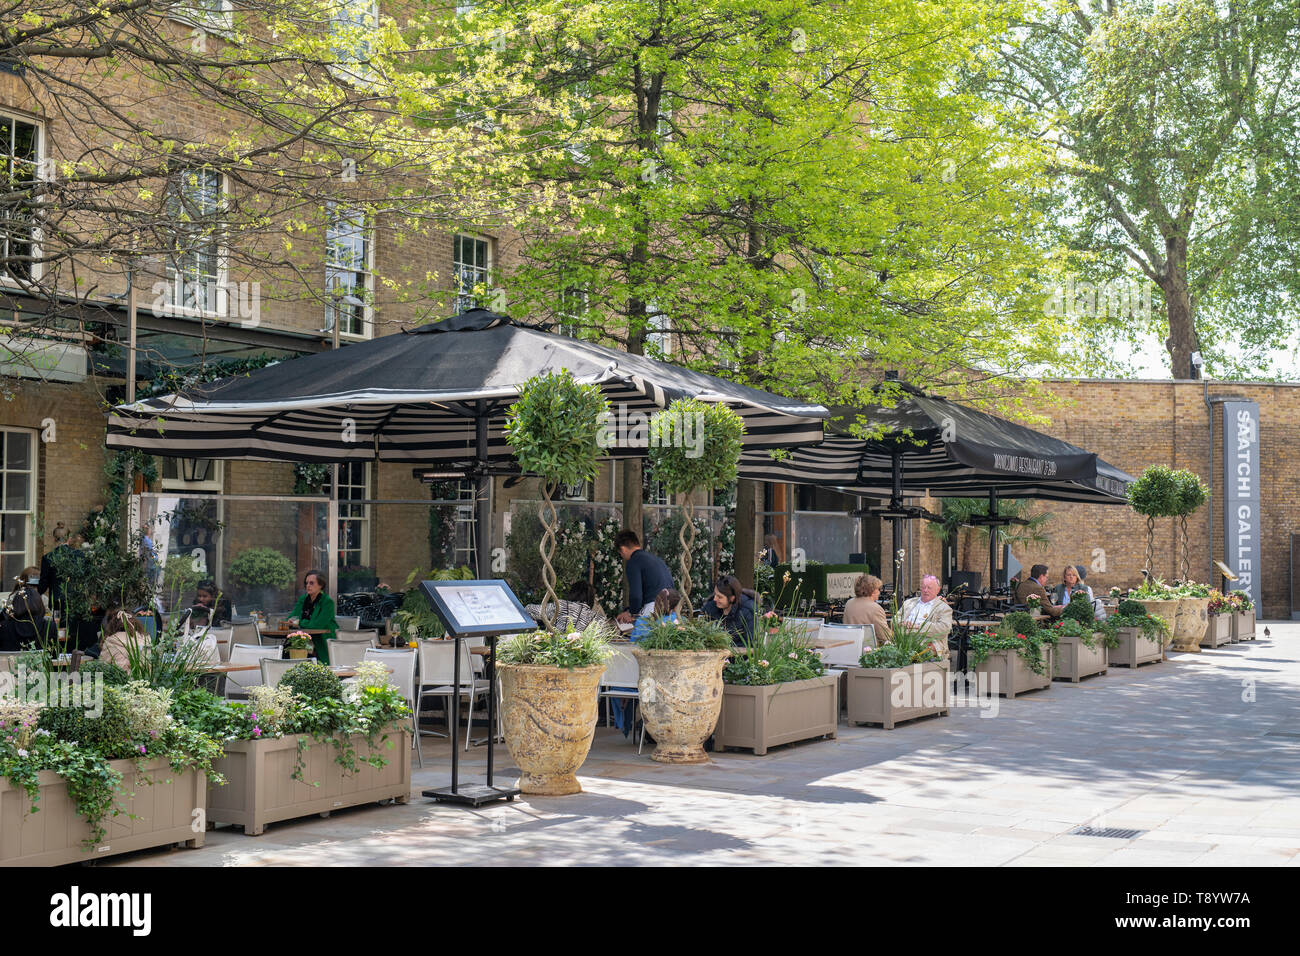 Plant pots and trees in the spring outside Manicomio restaurant, Duke of York Square, Chelsea, London, England Stock Photo